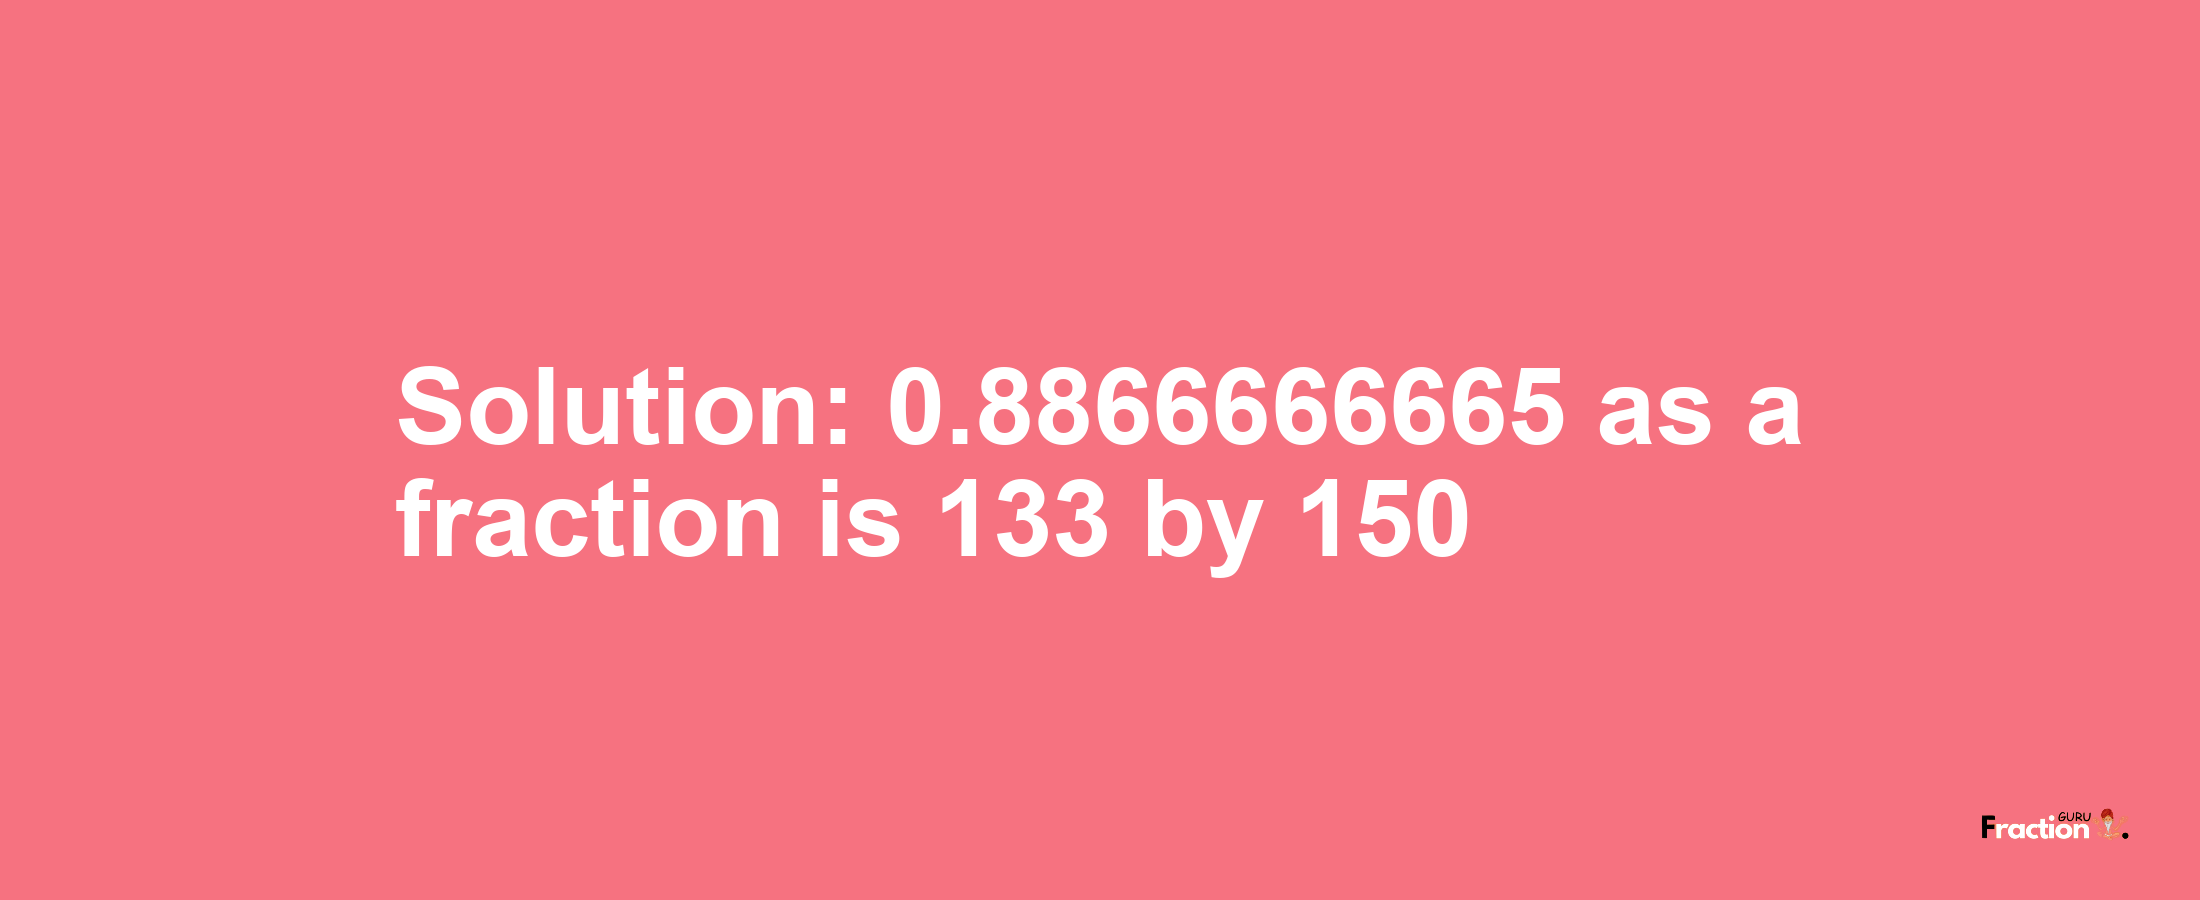 Solution:0.8866666665 as a fraction is 133/150